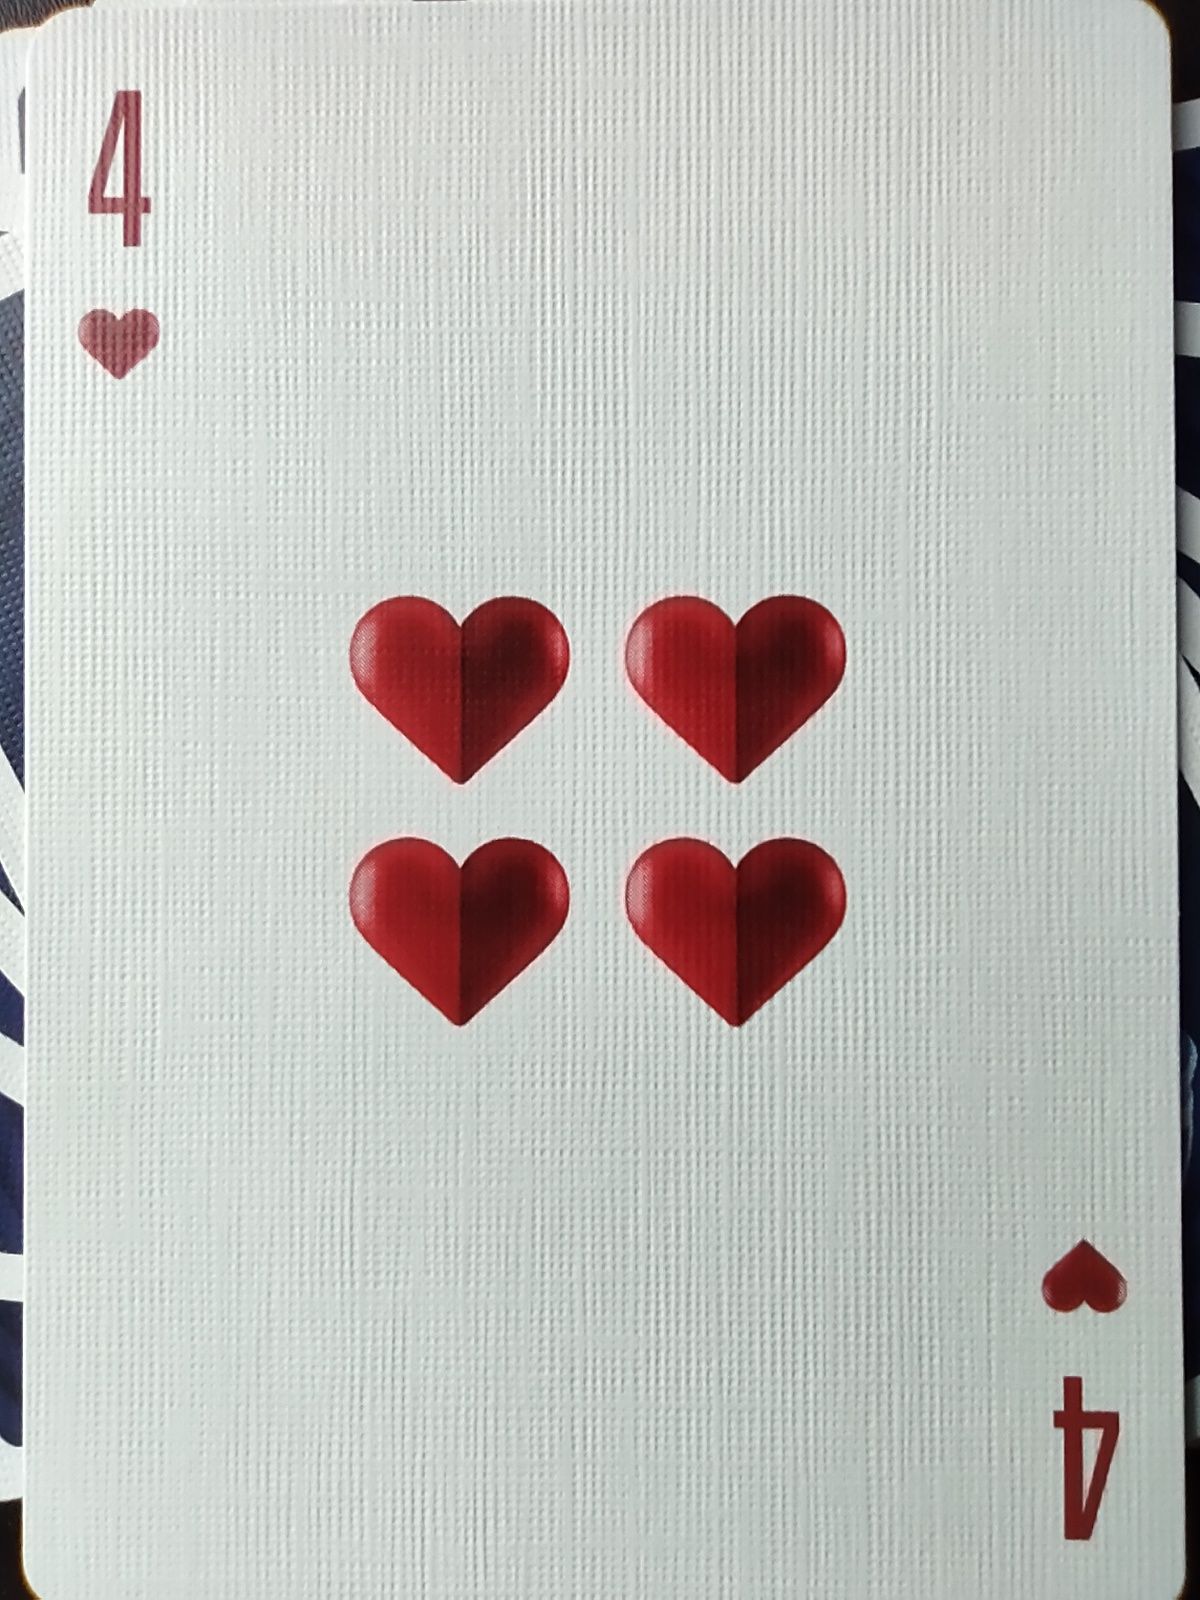 4 of hearts. From the Play Dead deck by Riffle Shuffle.